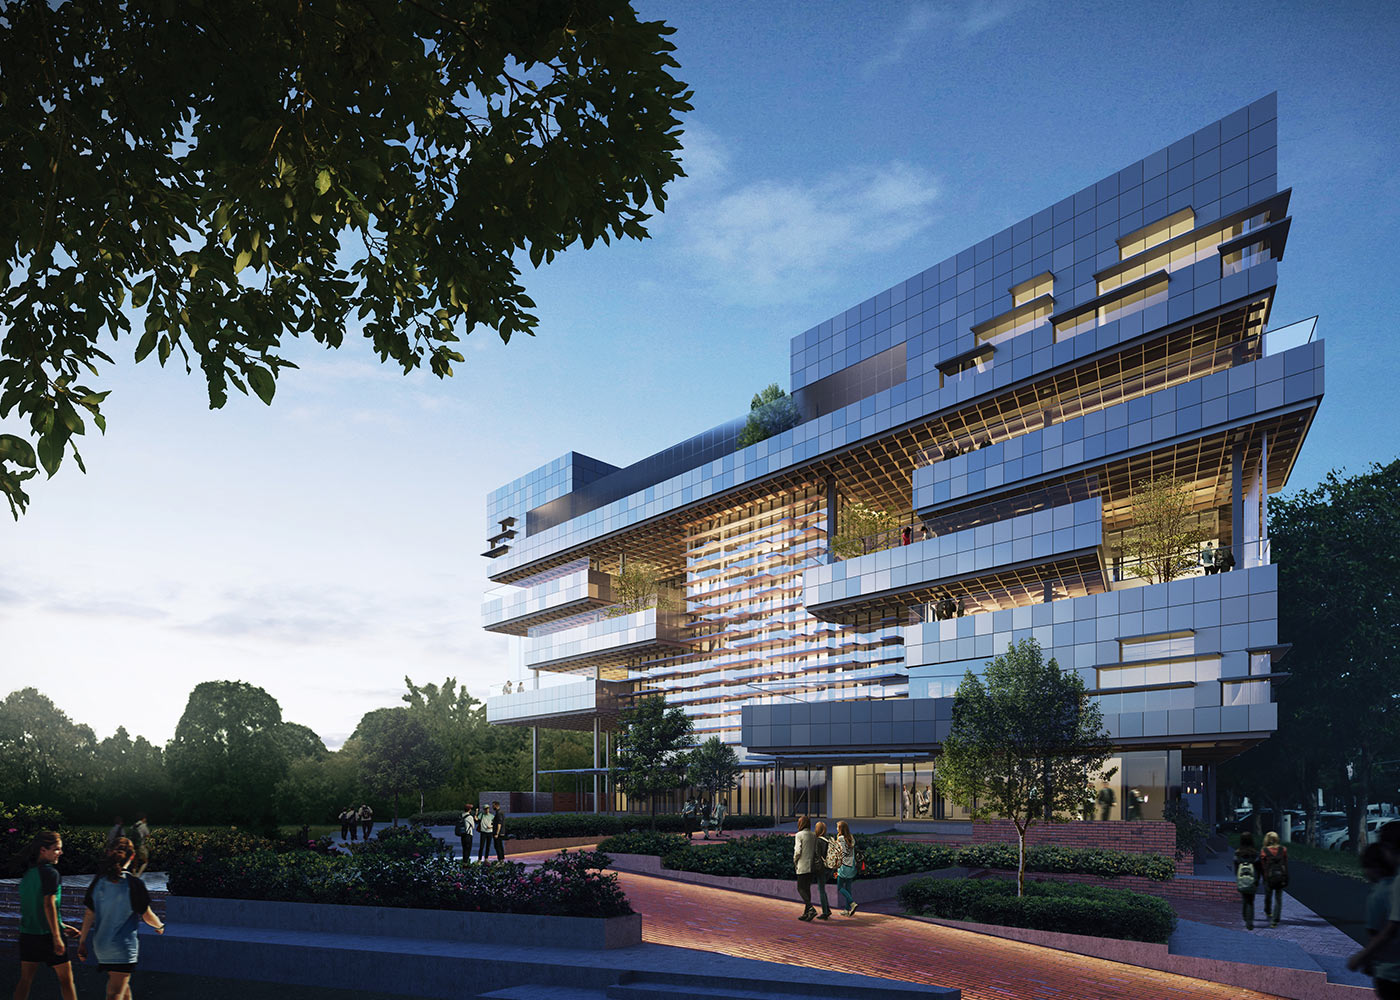 Two new vertical schools for inner city Brisbane as part of state government's $500 million proposal.